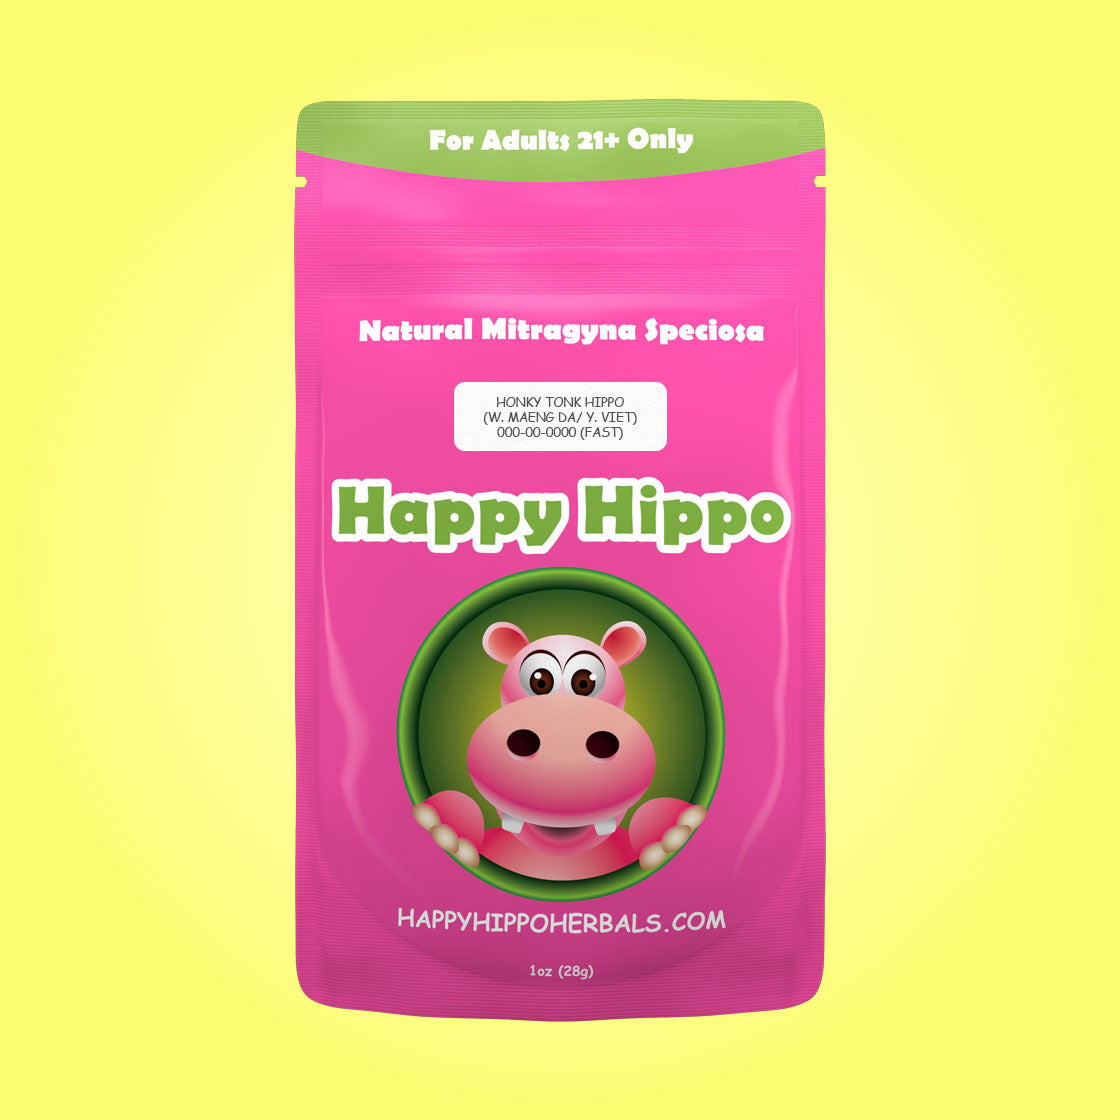 Product Image depicting a 1oz bag of Happy Hippo Blended White Maeng Da and Yellow Vietnam Kratom Powder (Mitragyna Speciosa). Also known as Honky Tonk Hippo.